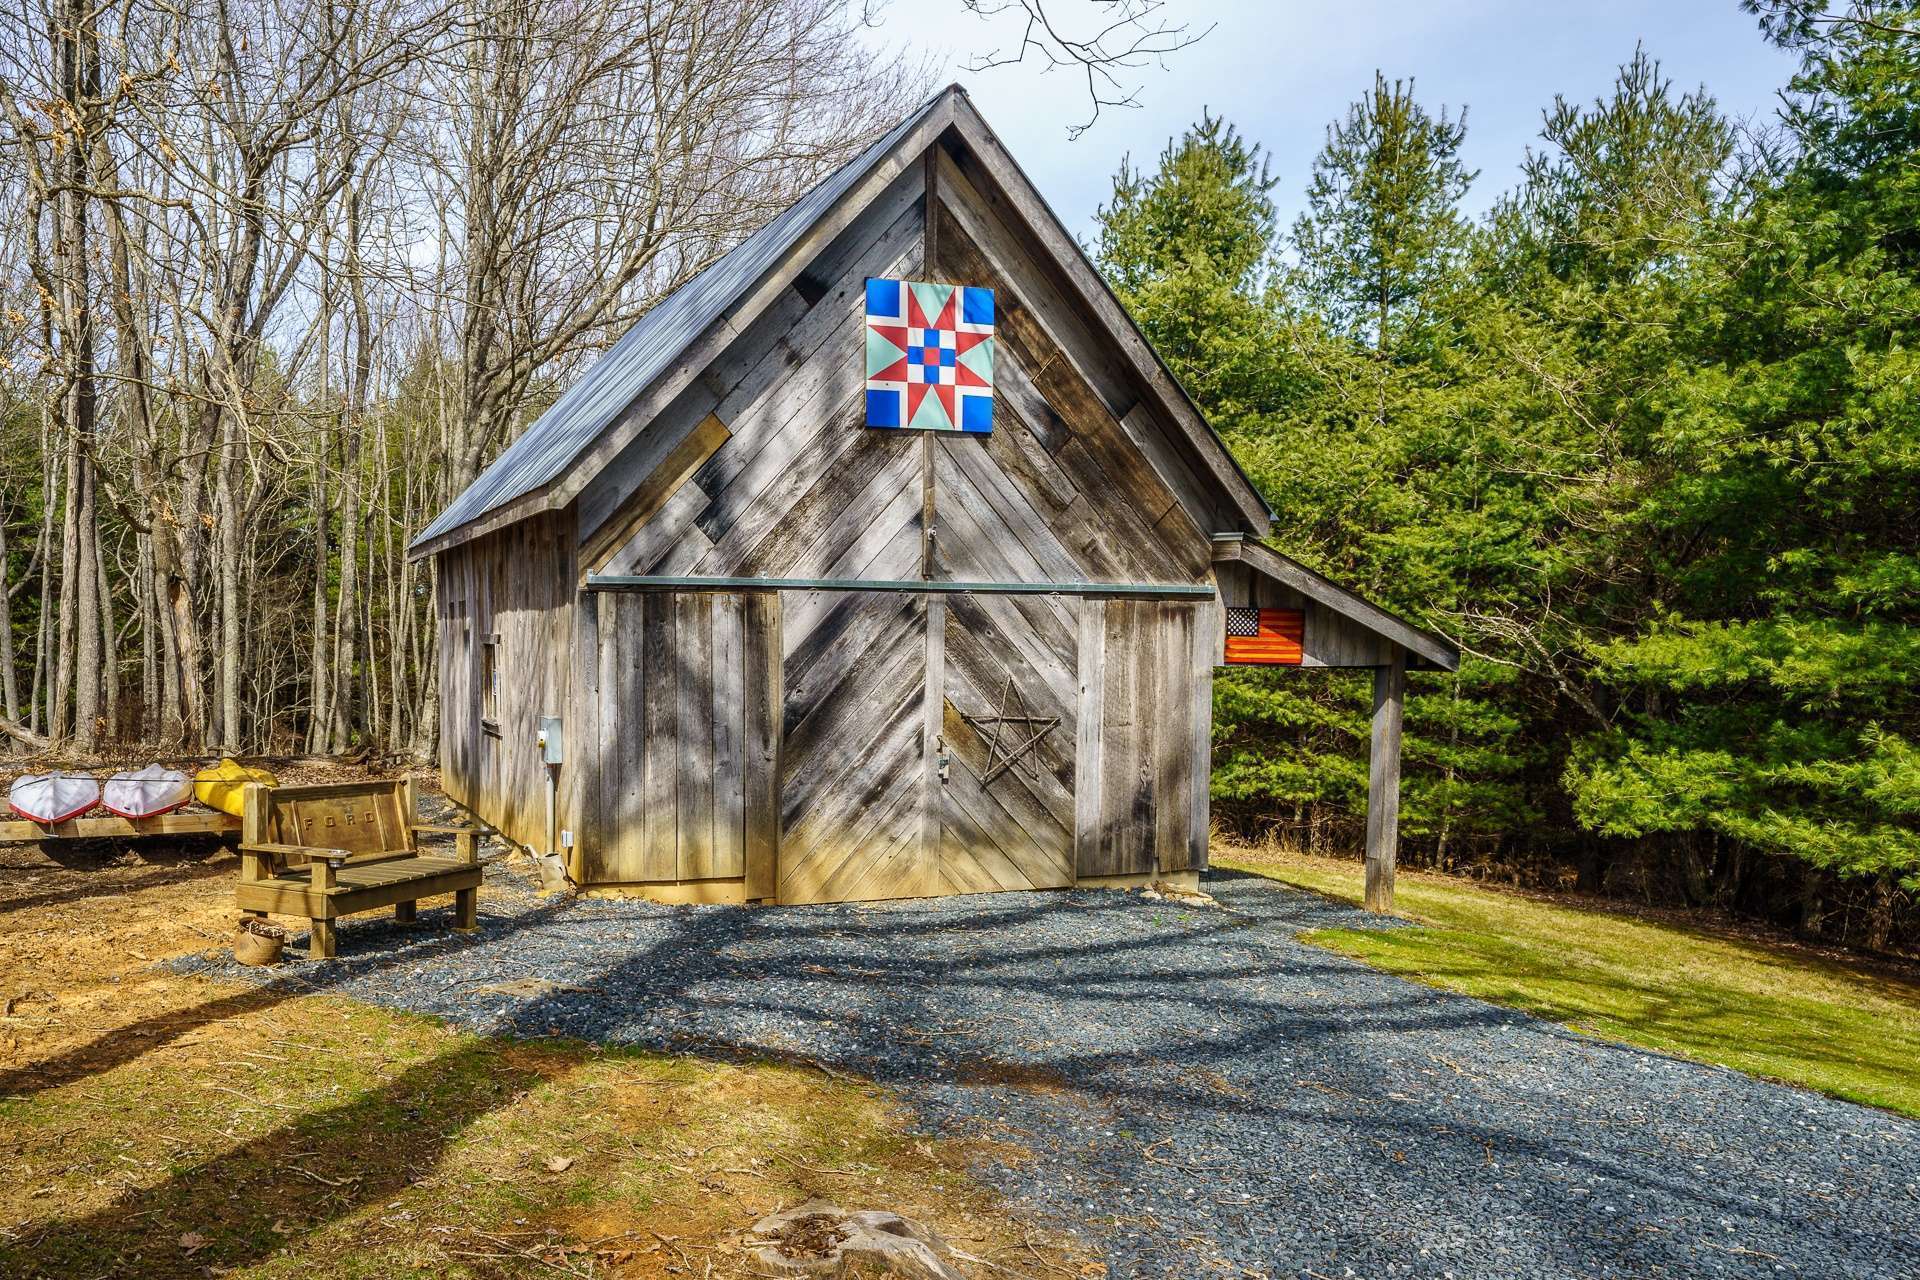 This unique barn was built from reclaimed chestnut wood, offers a concrete floor, insulation and electricity, and serves nicely as a workshop and storage space for lawn and garden equipment, canoes, kayaks or other mountain toys.